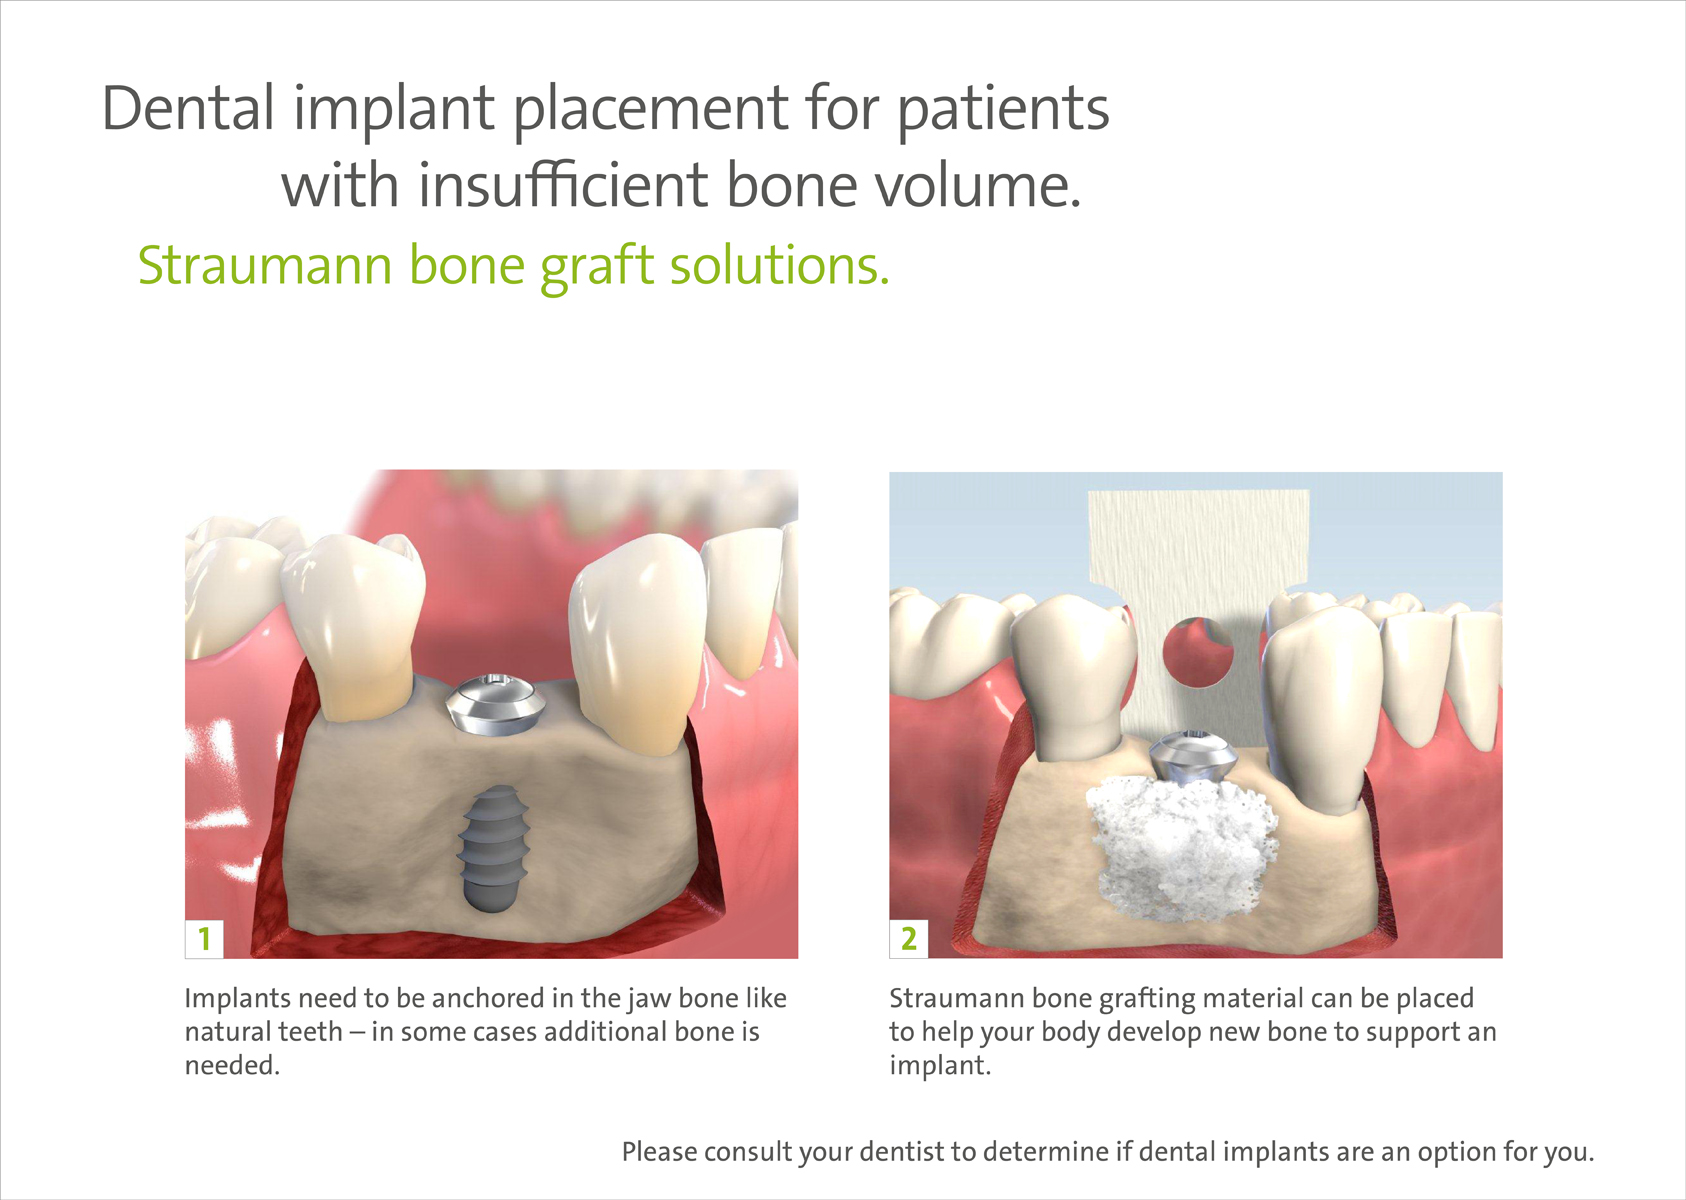 Dental implant placement for insufficient bone volume